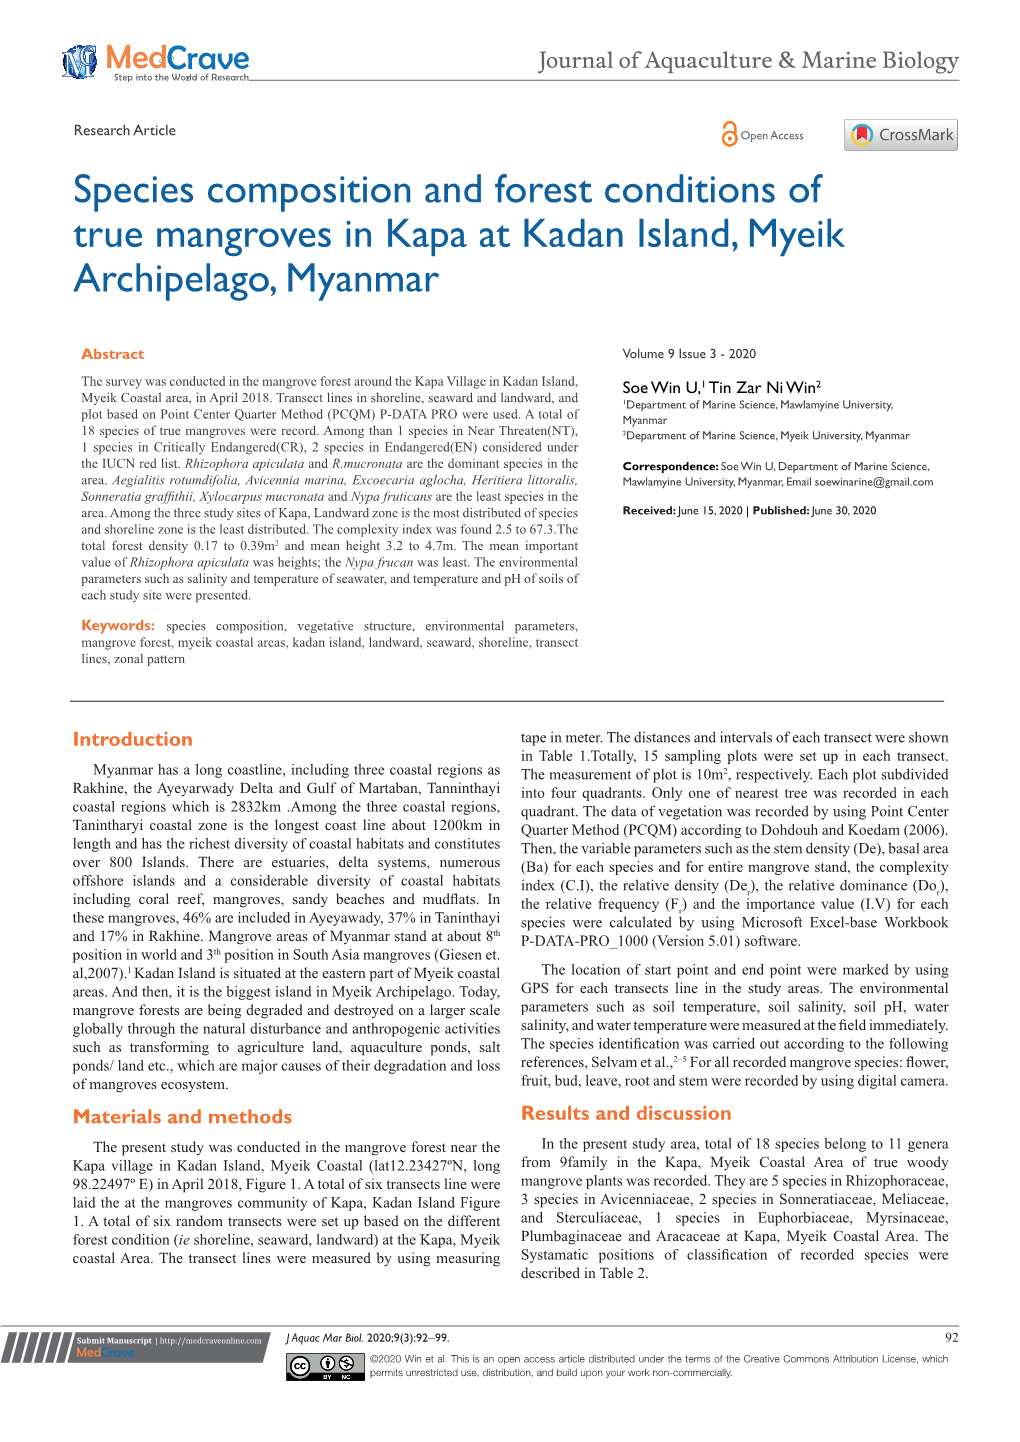 Species Composition and Forest Conditions of True Mangroves in Kapa at Kadan Island, Myeik Archipelago, Myanmar